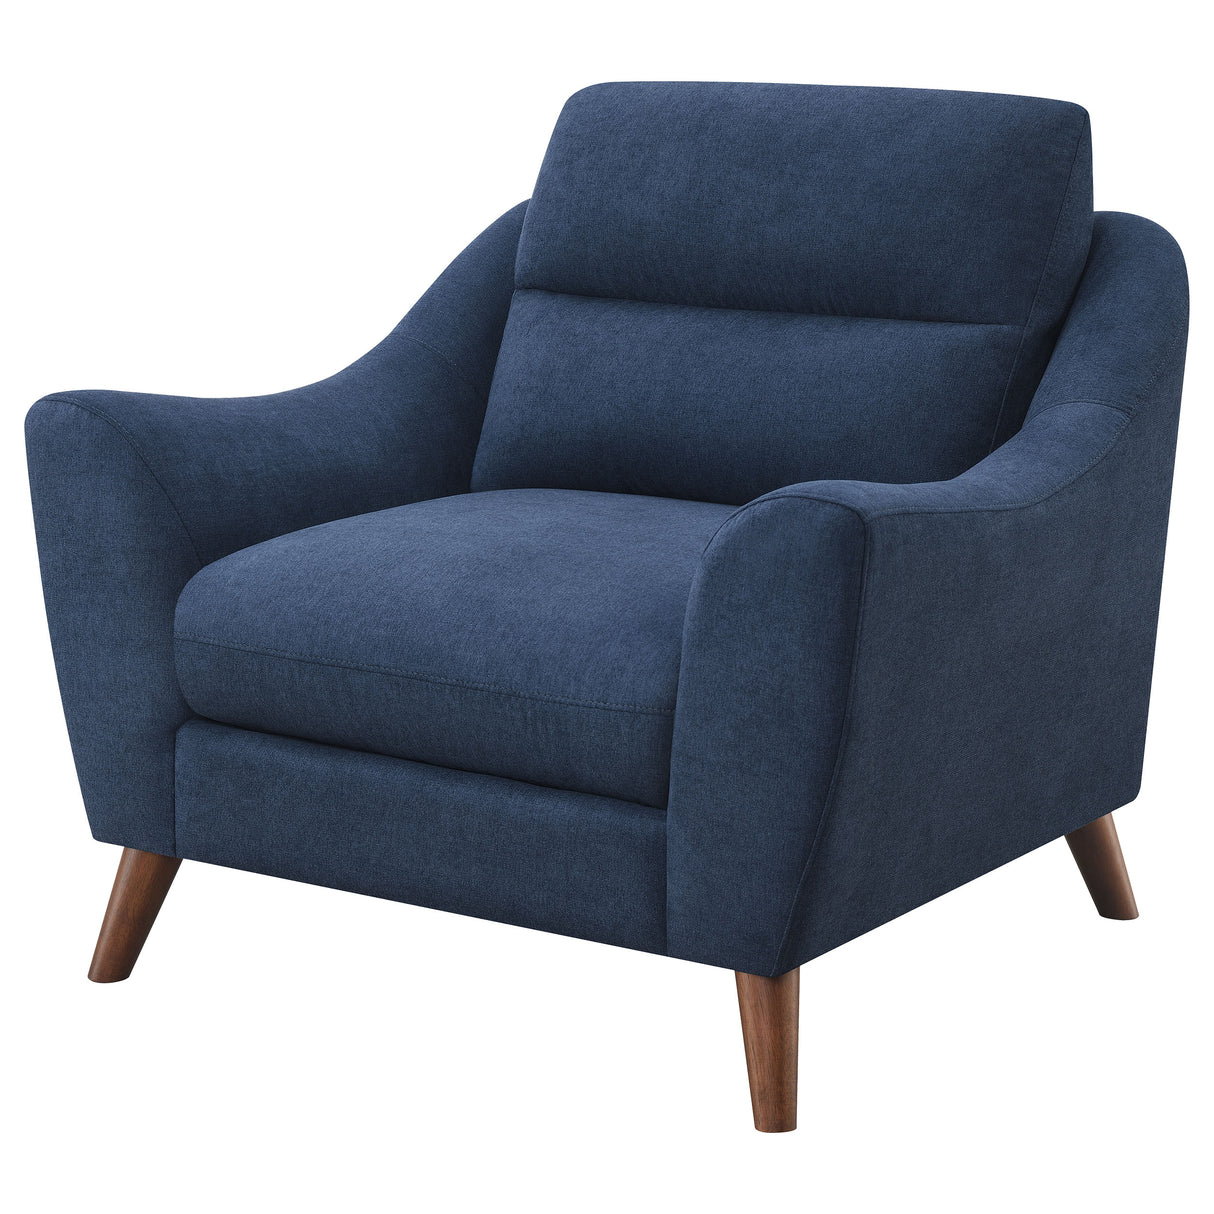 Chair - Gano Sloped Arm Upholstered Chair Navy Blue